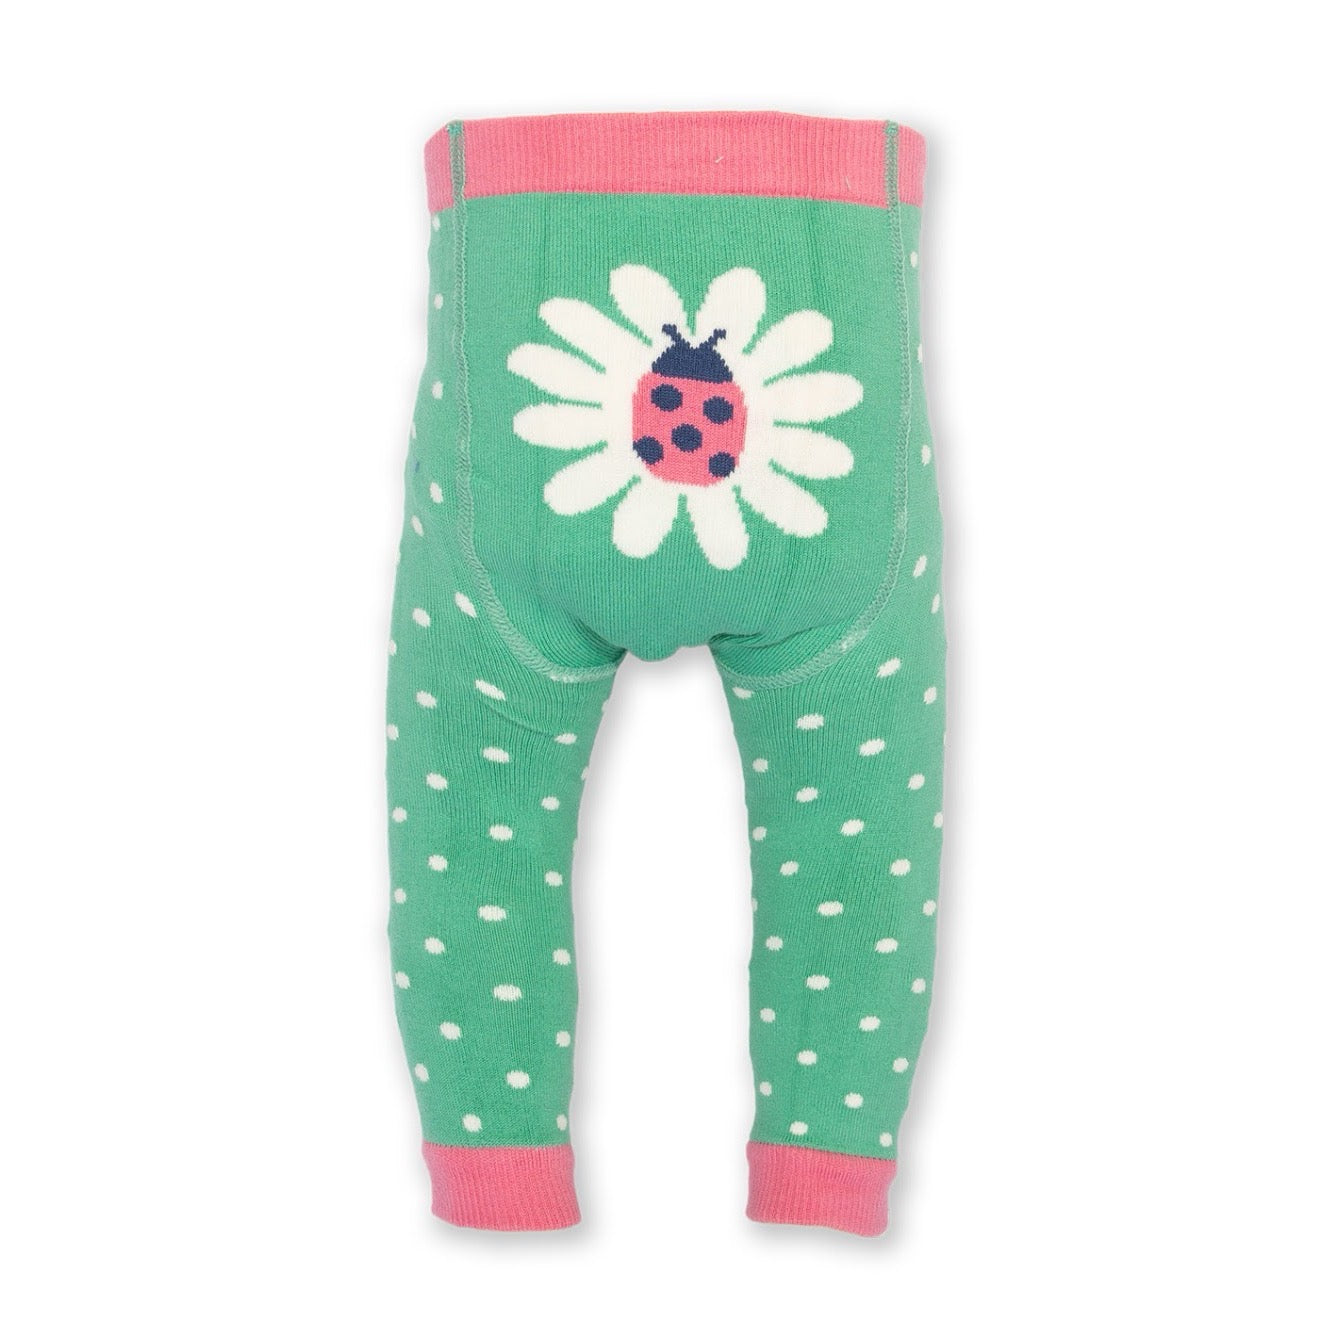 Kite Lady Daisy Infant Knitted Leggings 41-3177 Clothing 0-6M / Green,6-12M / Green,12-24M / Green